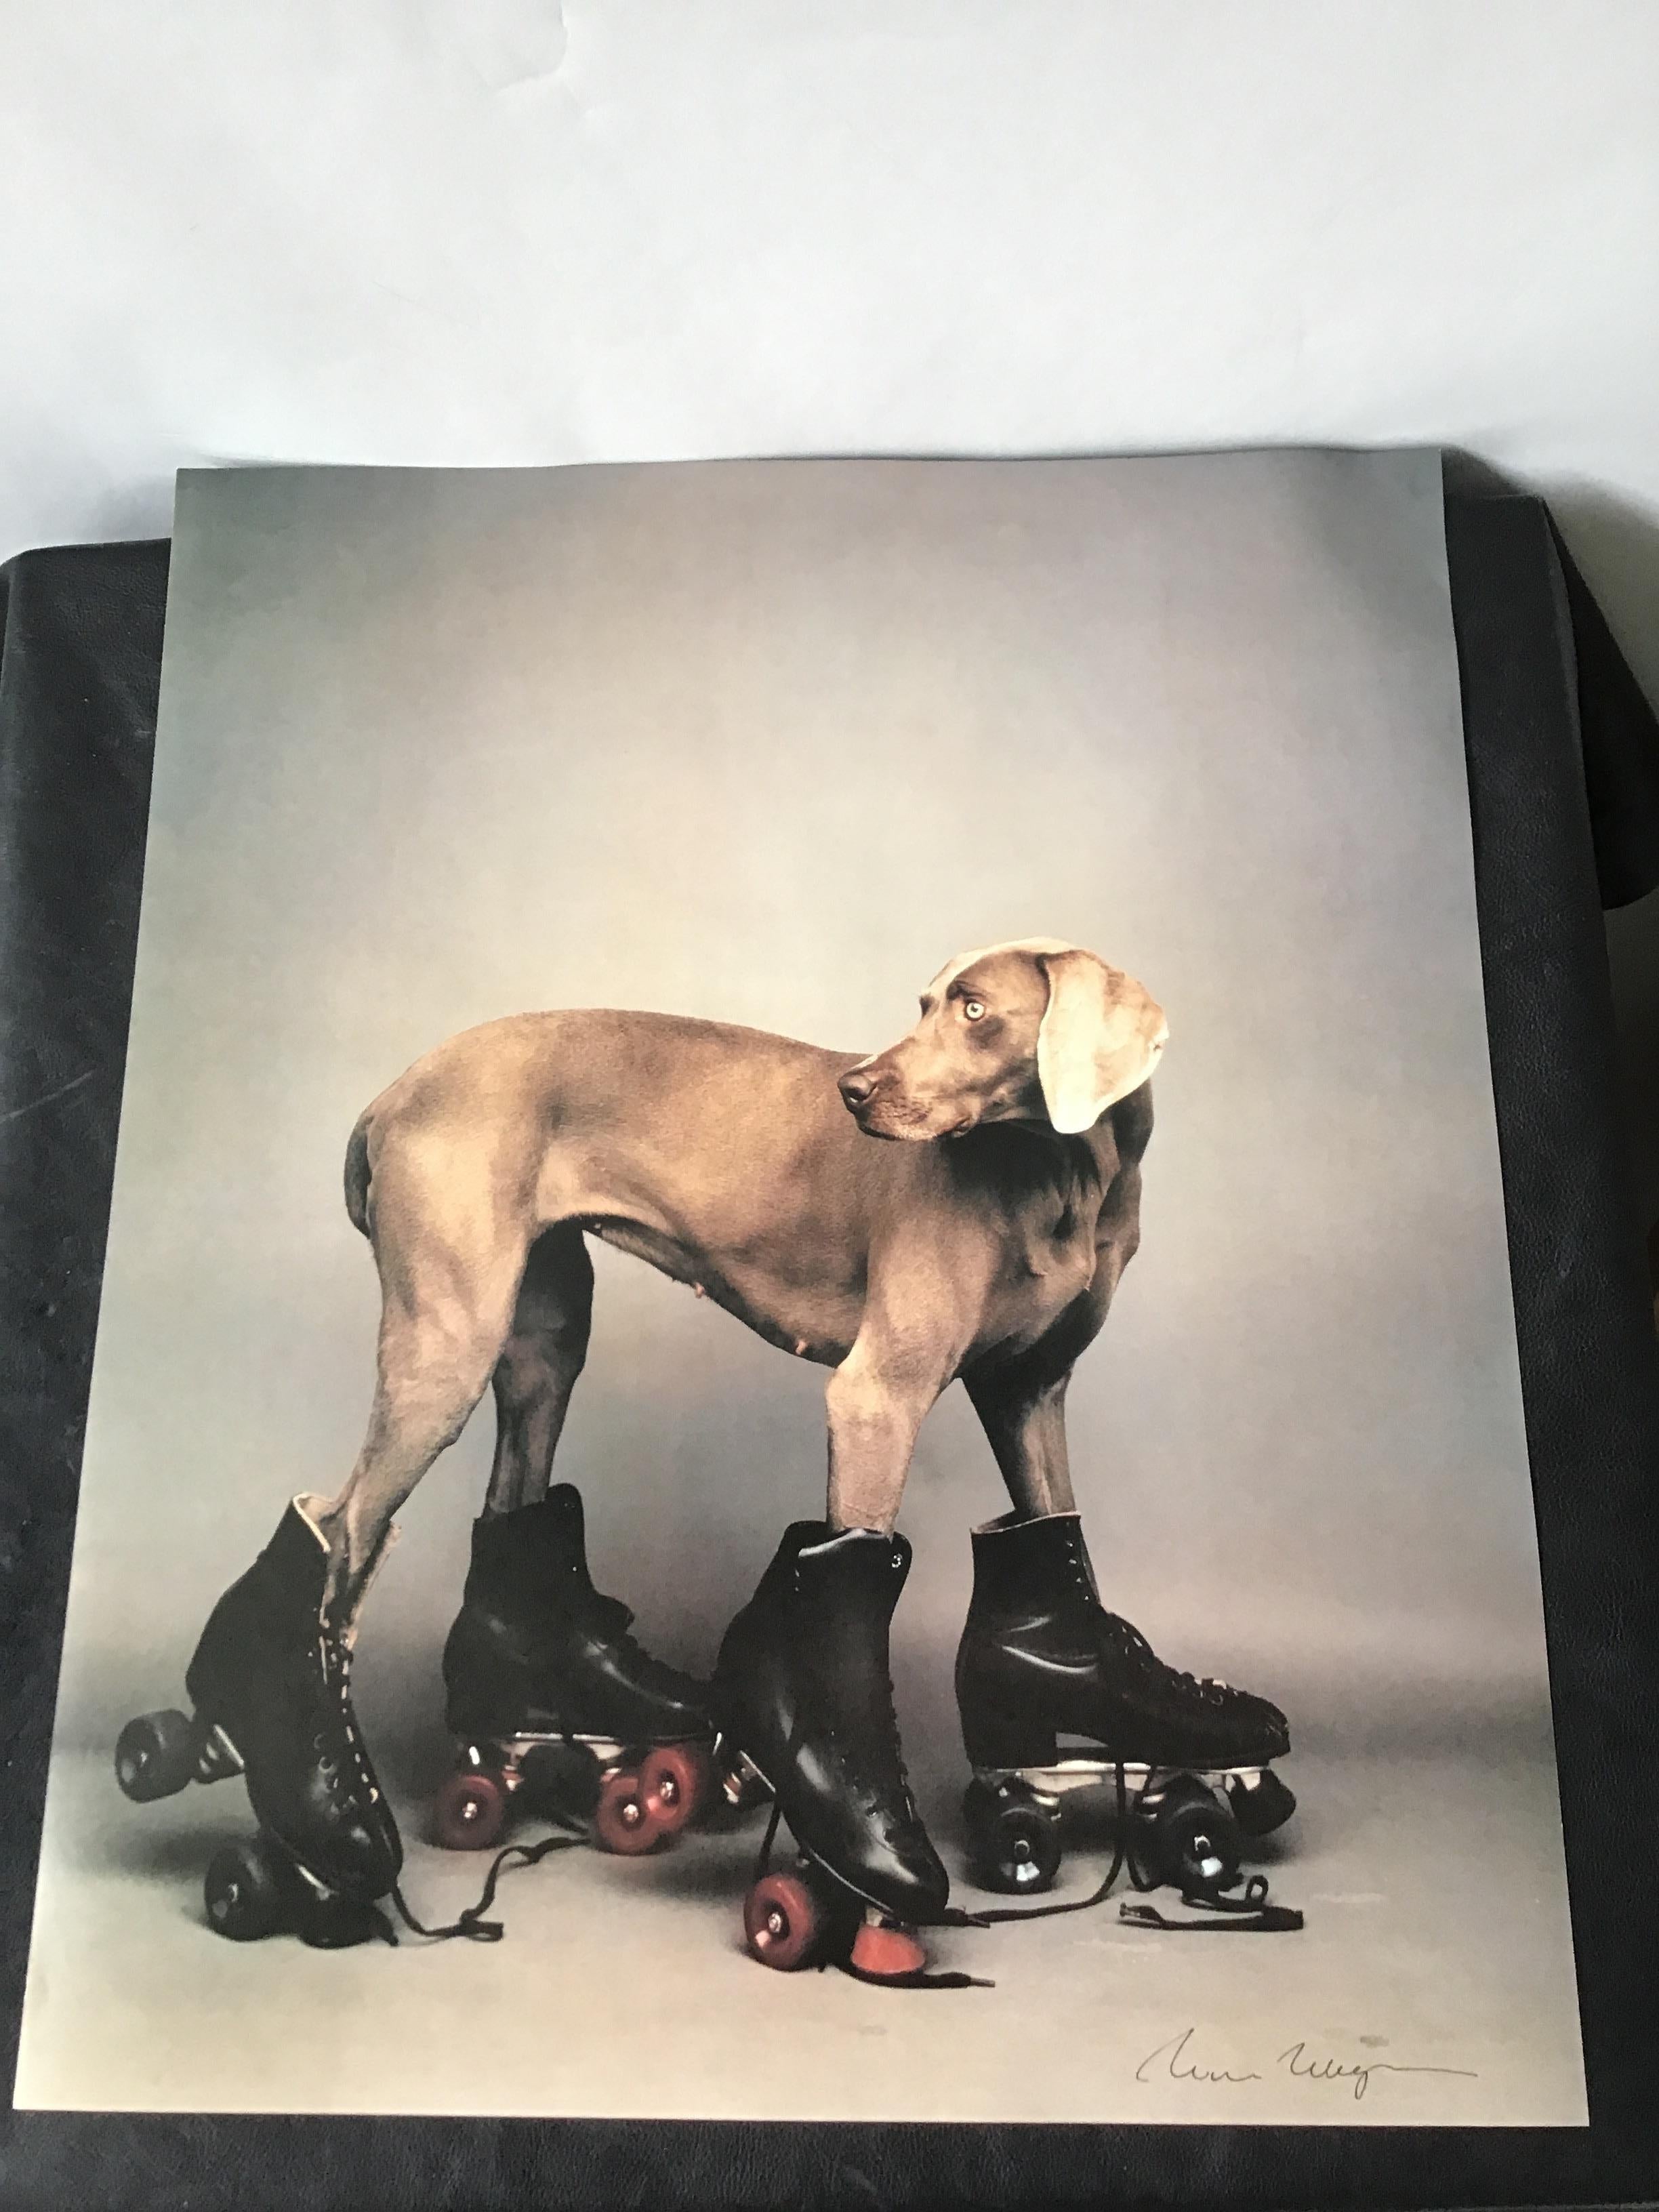 Signed William Wegman Roller Rover color print. 20 x 24. From the NYC Saks Fifth Ave department store. This was part of an art exhibit they had years ago.
There where  2 prints available. One print was sold, so there is no box available.